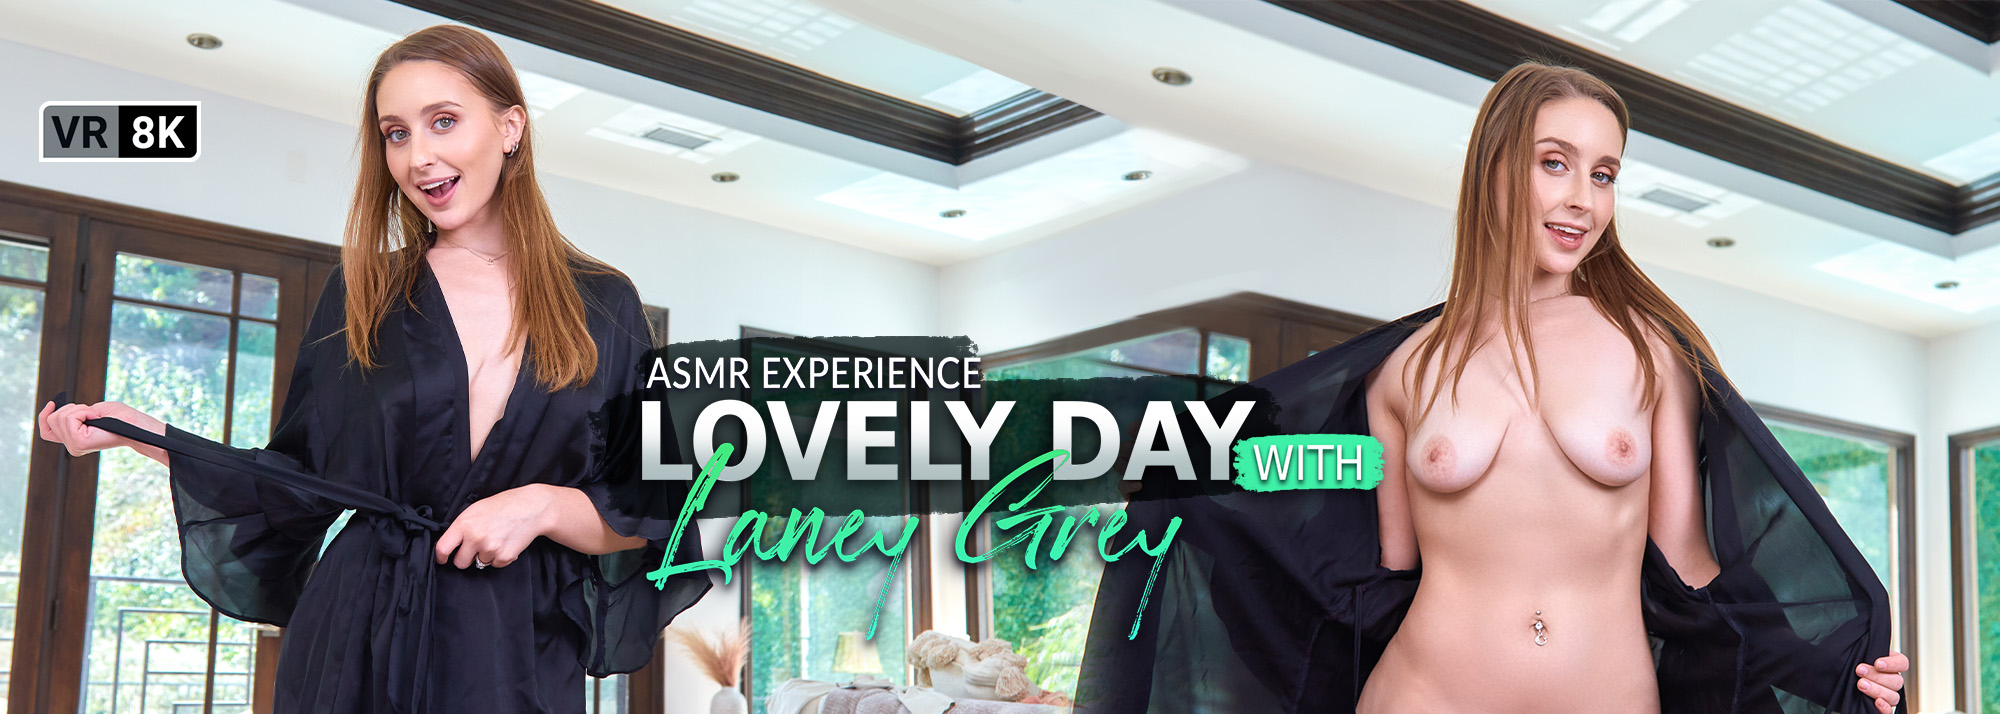 Lovely Day With Laney Grey (ASMR Experience) VR Porn Movie